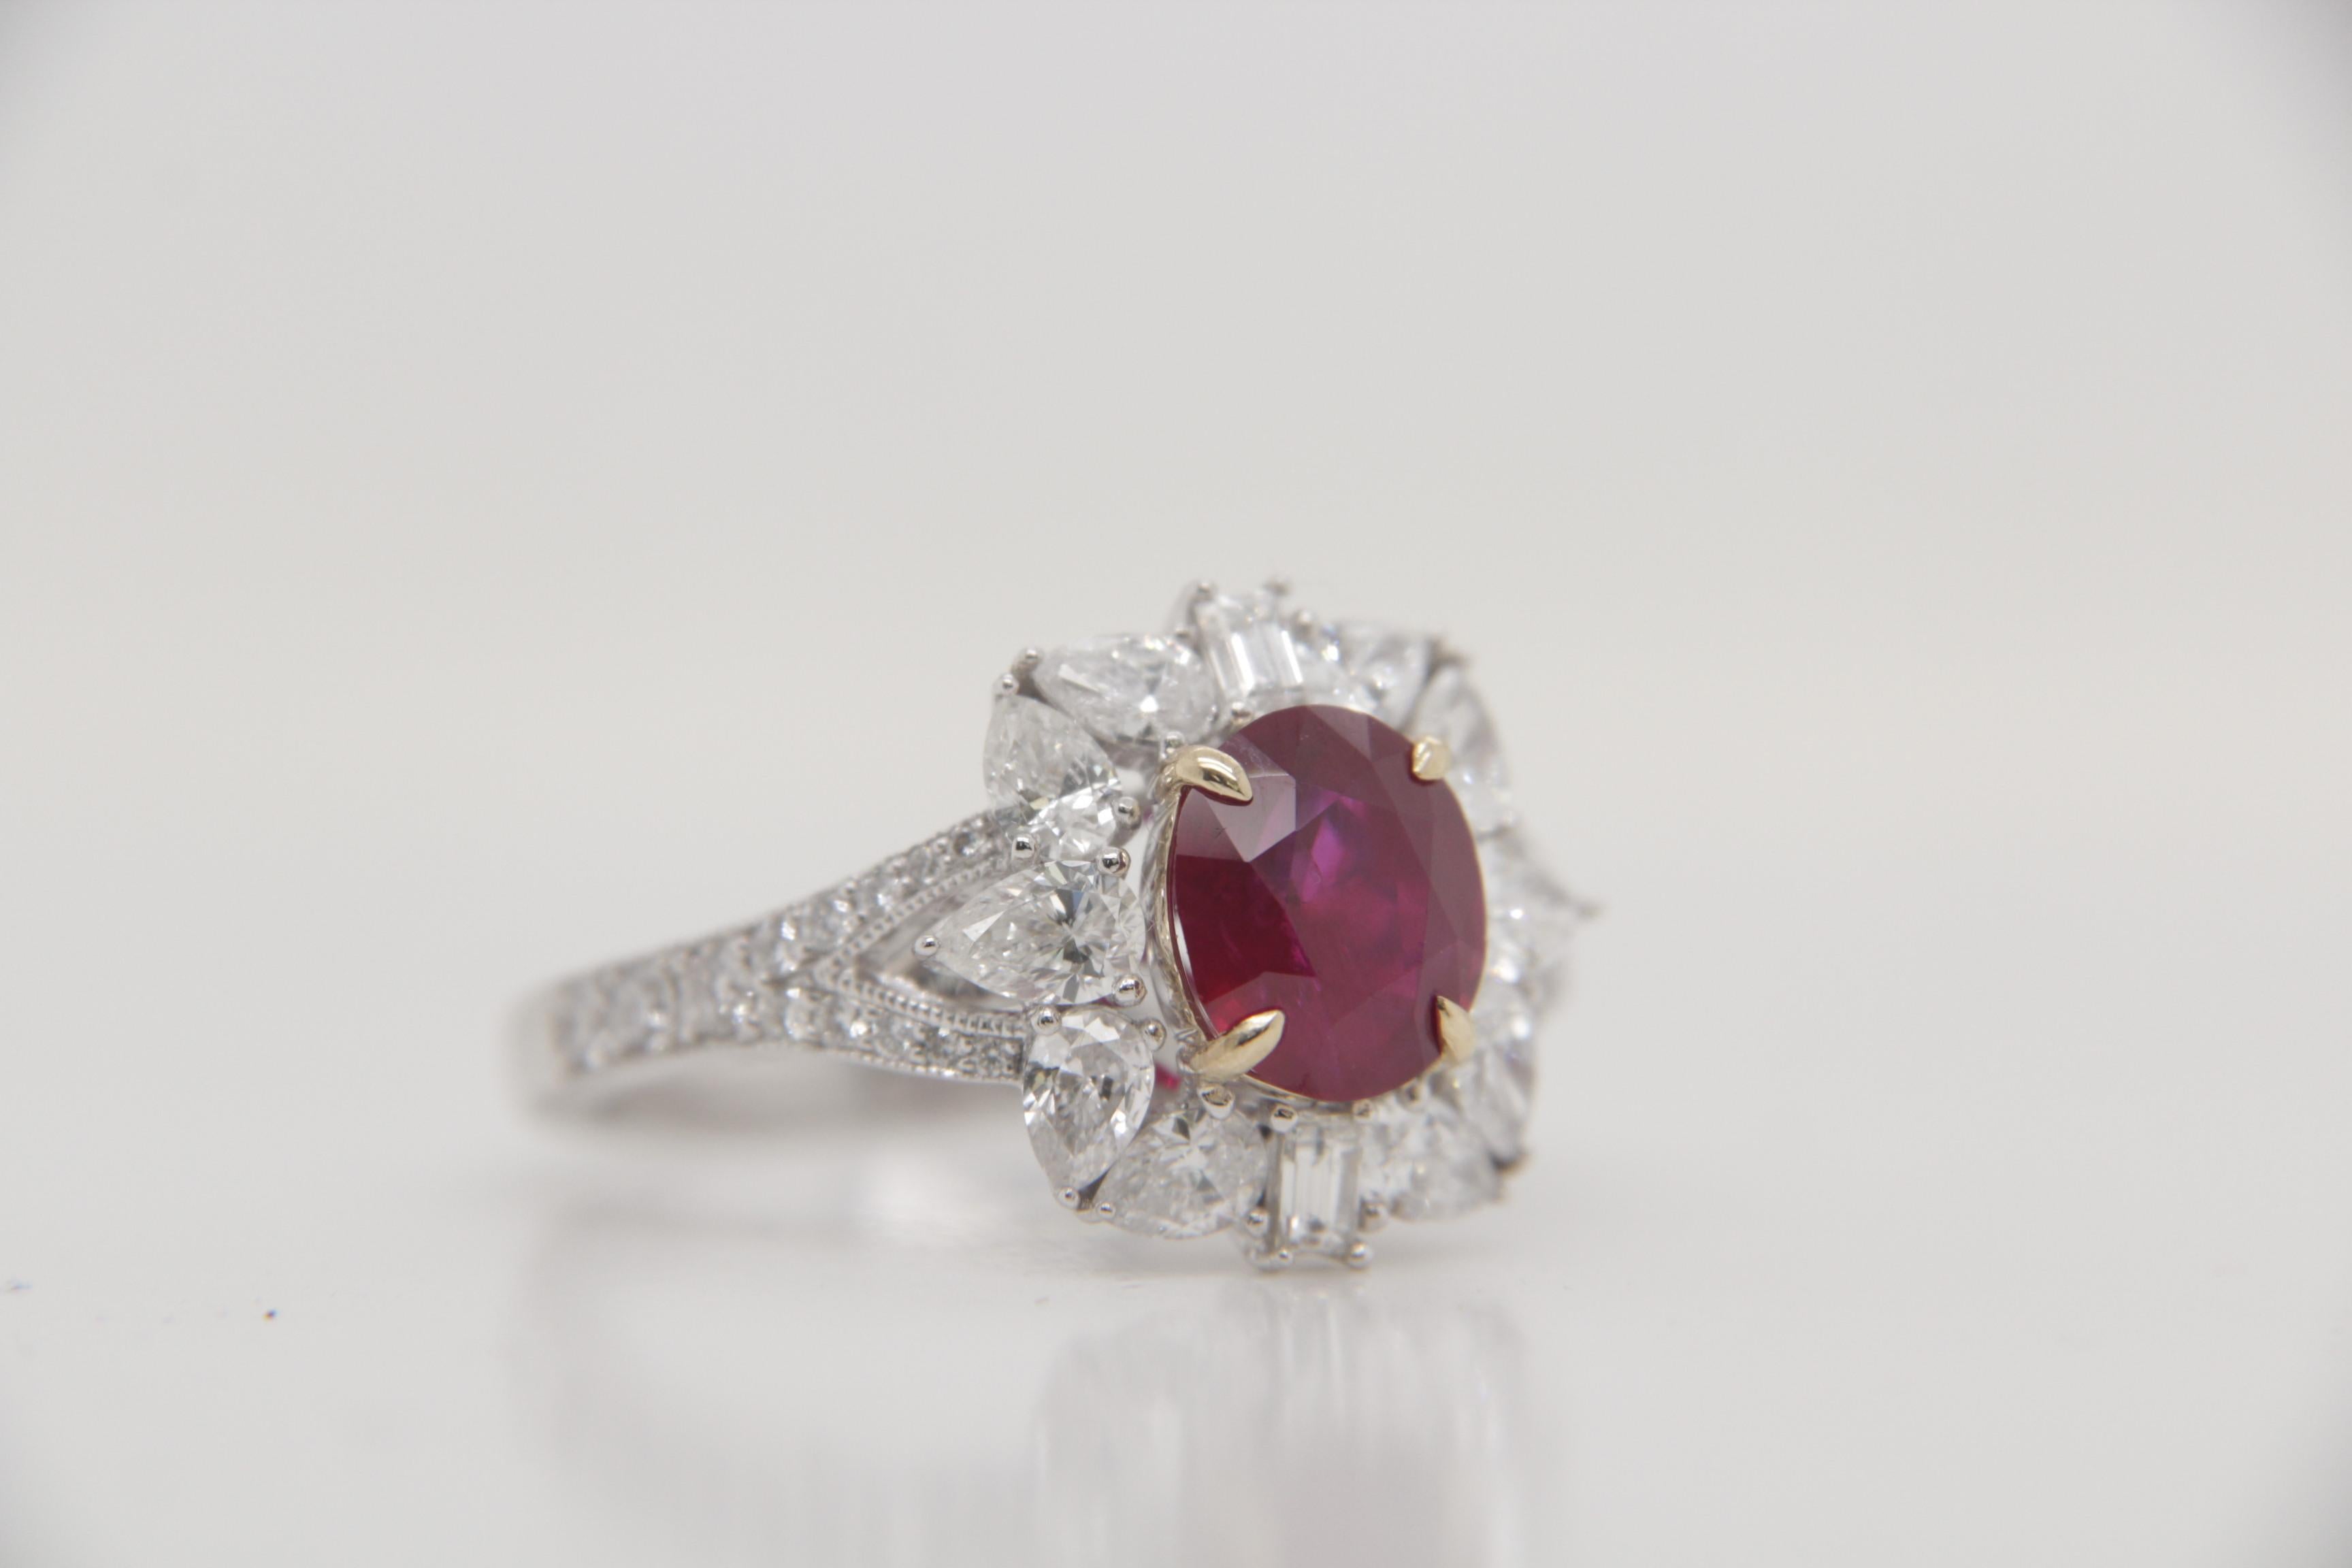 A brand new handcrafted ruby ring by Rewa Jewels. The ring's center stone is 2.18 carat Burmese ruby certified by Gem Research Swisslab (GRS) as natural, unheated, 'Pigeon blood' with the certificate number: 2023-020209. The centre ruby has been set